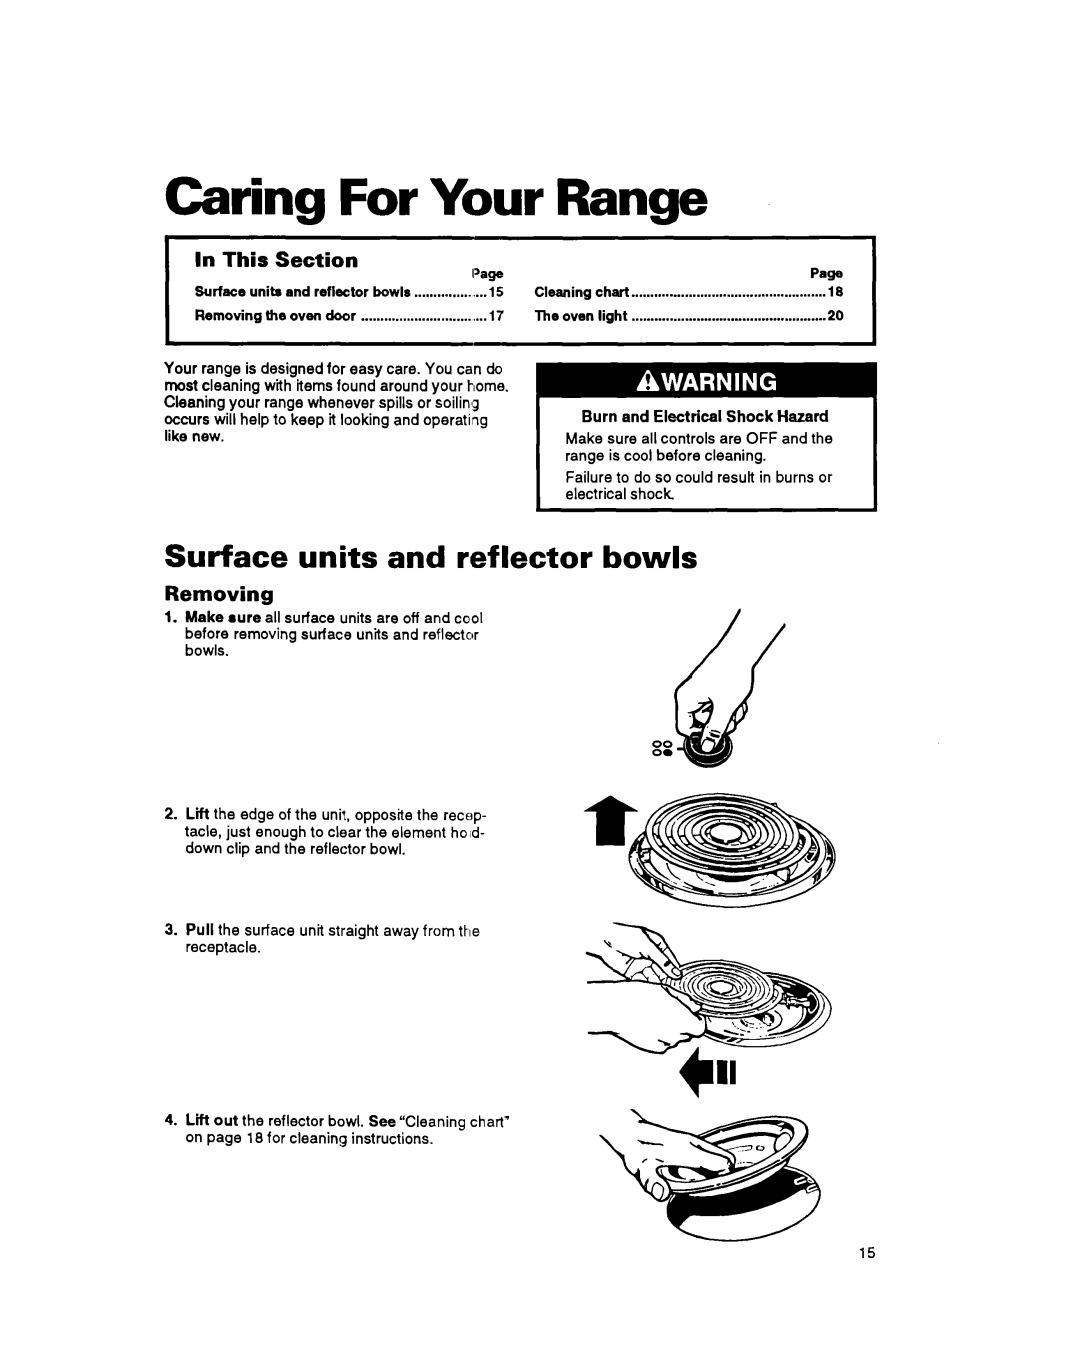 Whirlpool RS600BXB manual Caring For Your Range, Surface units and reflector bowls, In This Section, Page, Removing 